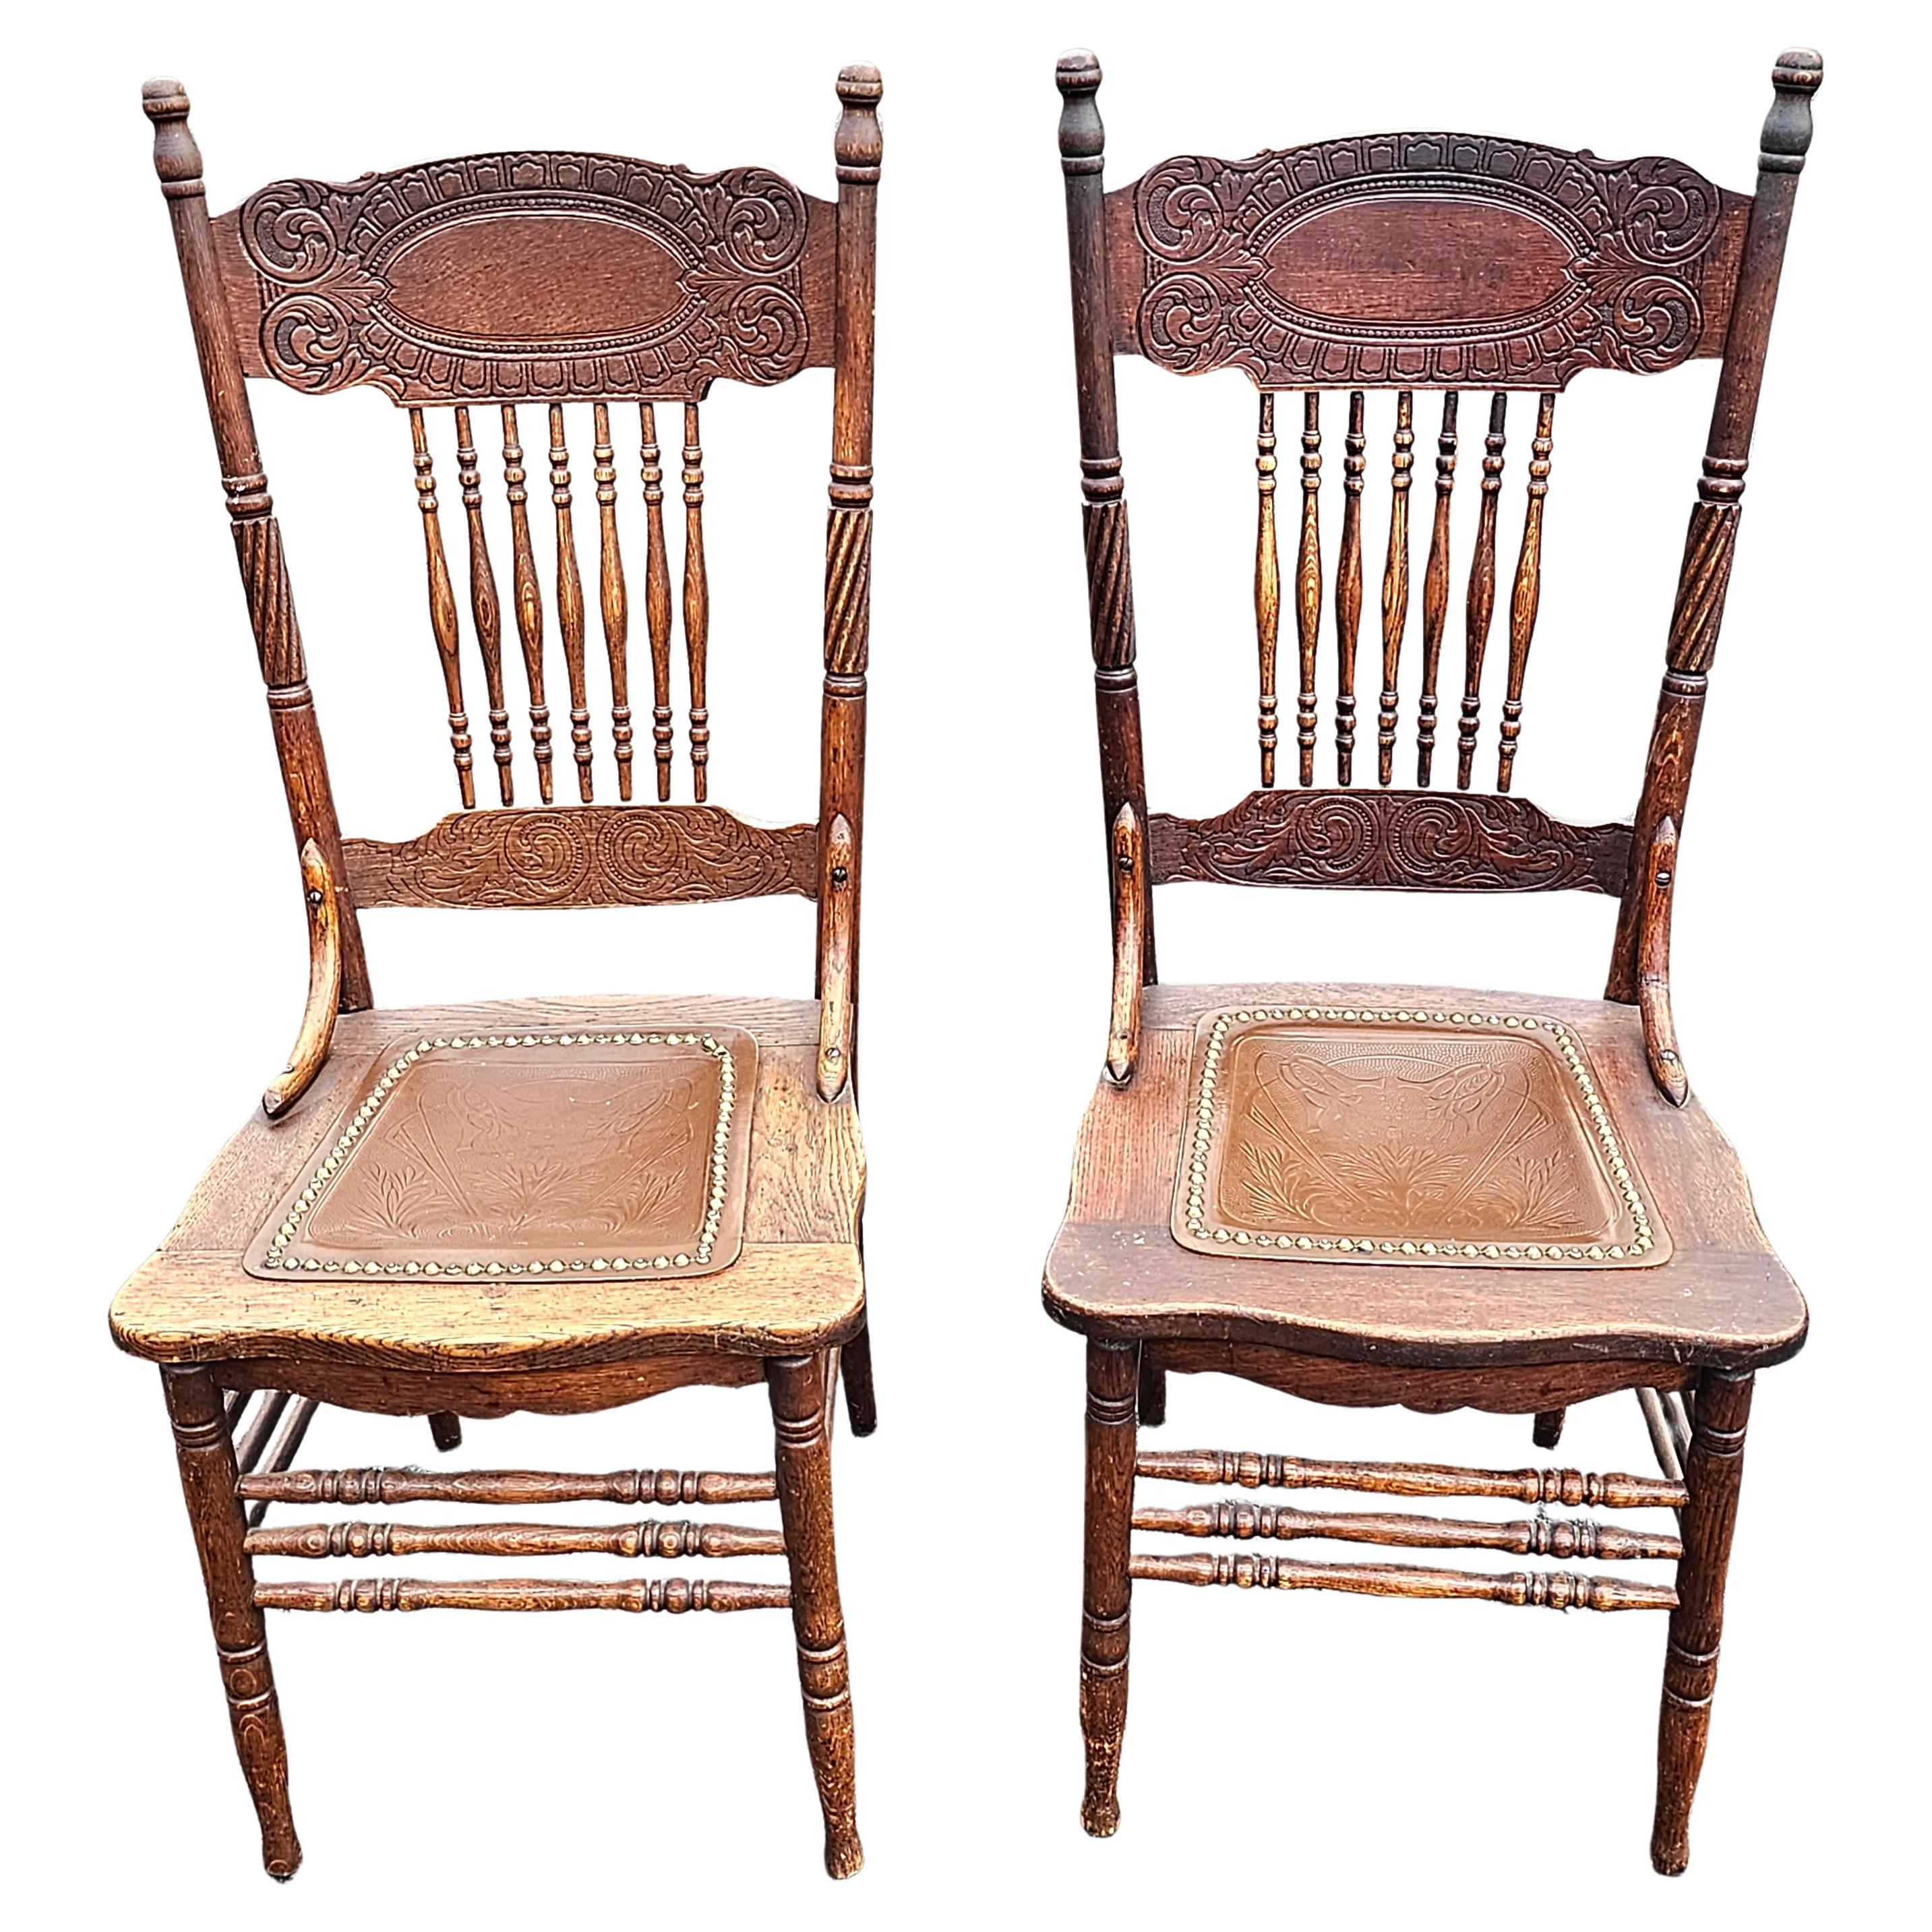 A pair of early 1900s   Spindle Oak and  Embossed and etched  Leather seat and press back Side Chairs in great antique condition by the Larkin Furniture Co. famously known as Larkin Soap. Larkin Labels still visible on both chairs despite some